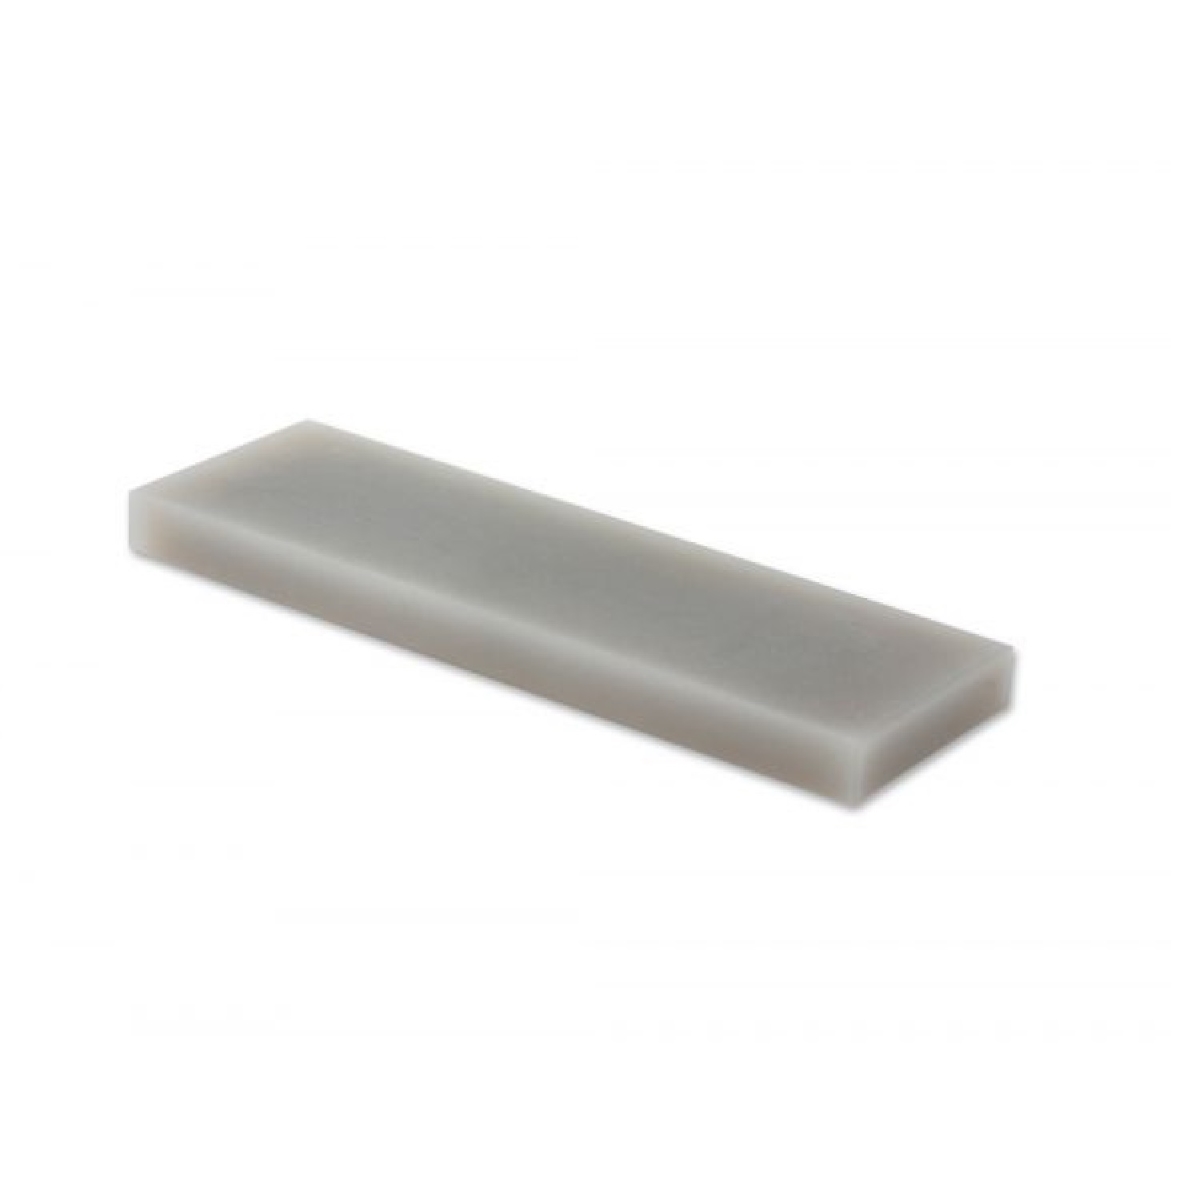 4017082 6 In. Transulcent Bench Stone With 8000-10000 Grit